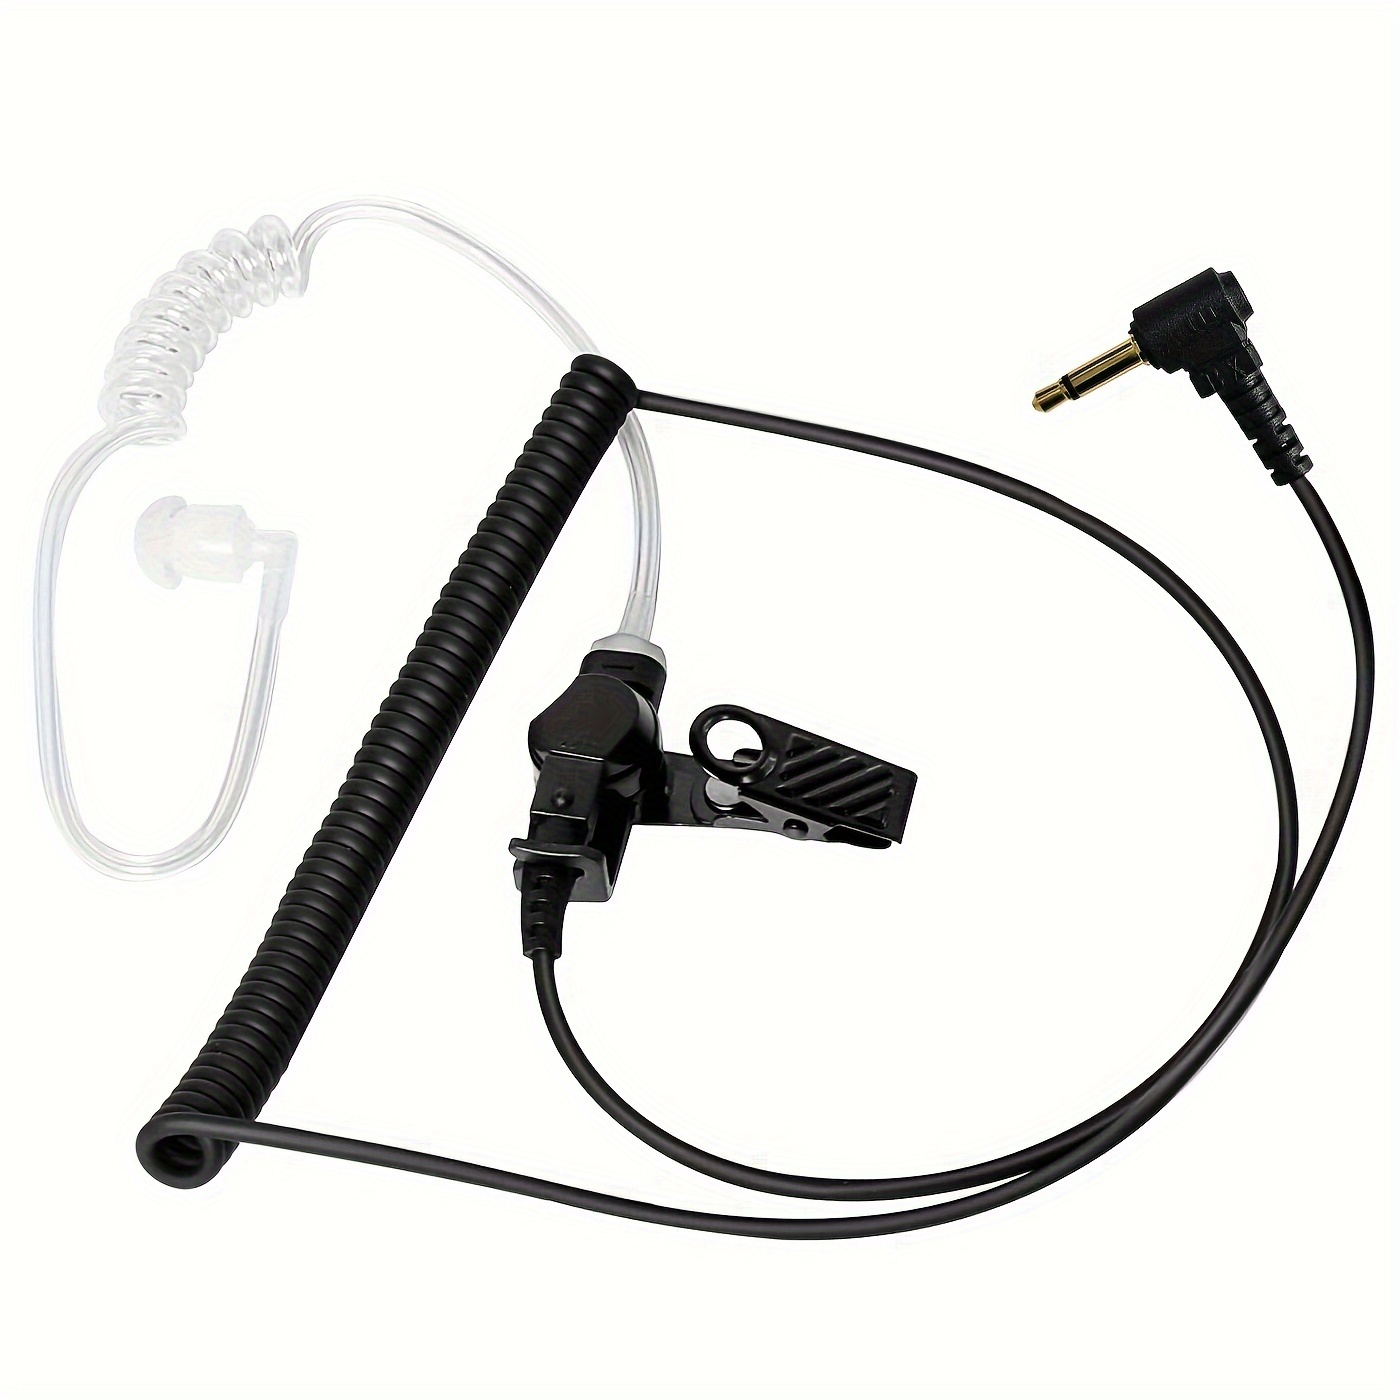 

Clear Acoustic Coil Tube Earpiece For 2-way Radios - Comfortable, Durable Listen-only Audio Kit With 3.5mm Jack, Ideal For Professional & Personal Use